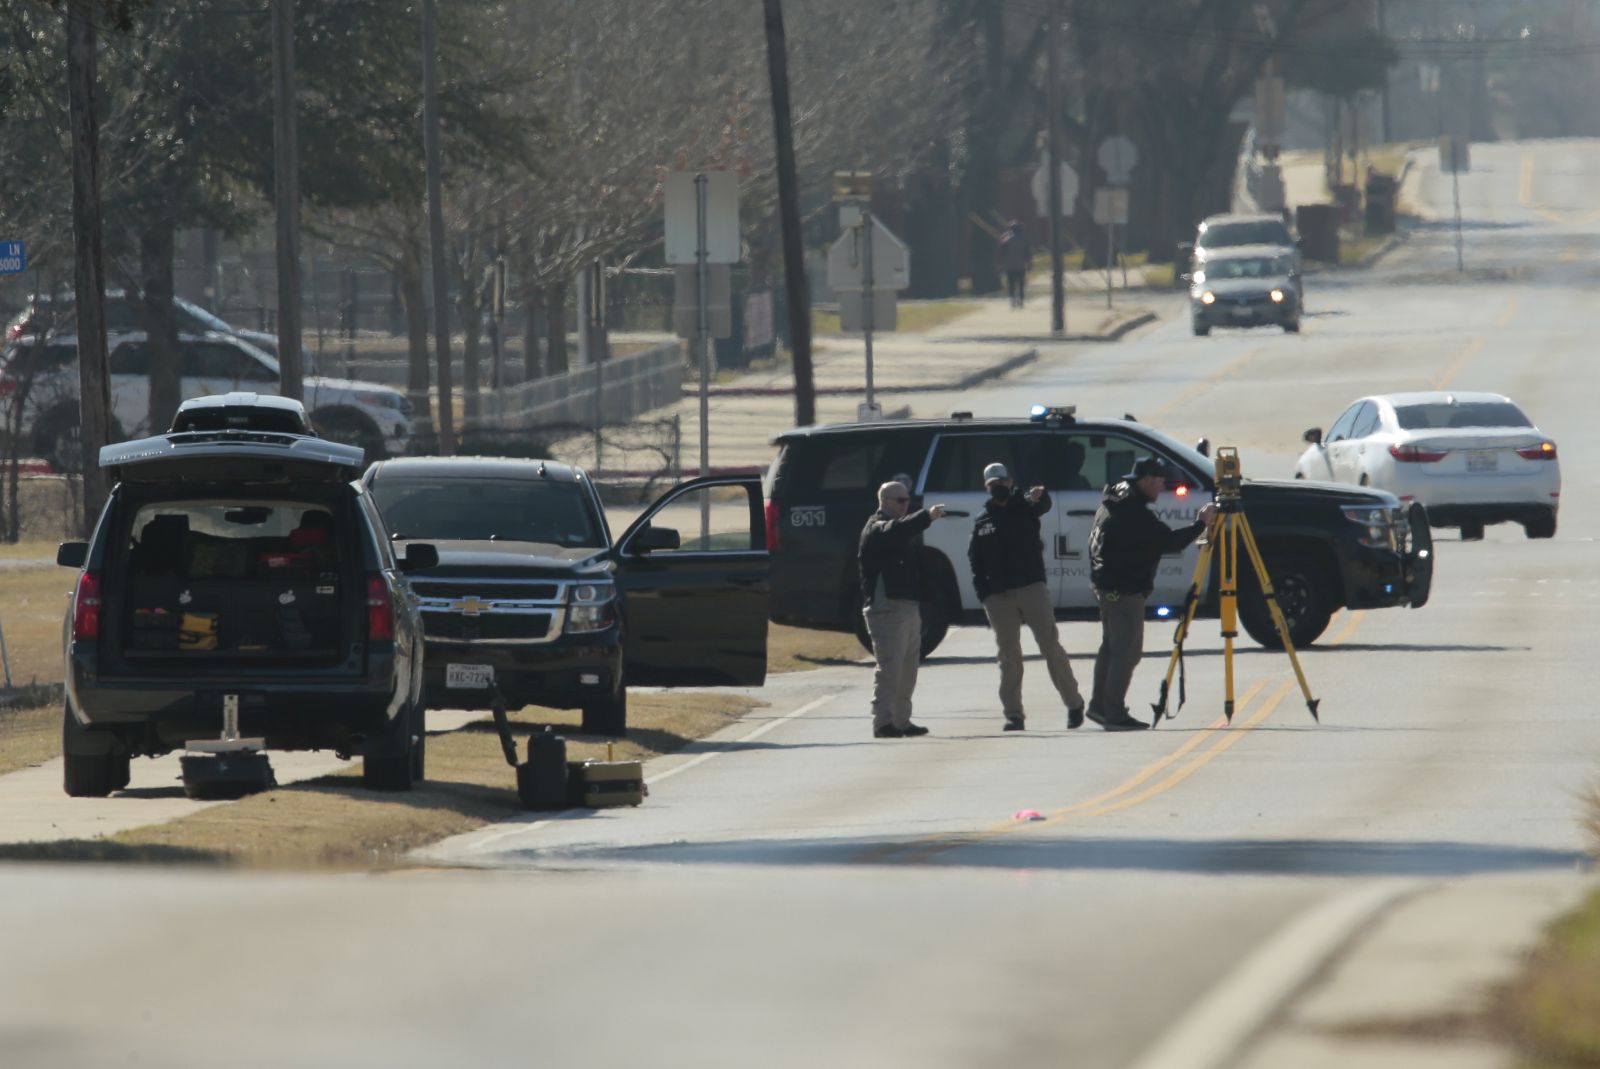 epa09689876 Law enforcement personnel continue the investigation to the hostage incident at Congregation Beth Israel Synagogue in Colleyville, Texas, USA, 16 January 2022. Four hostages were held by a gunman for ten hours in Congregation Beth Israel Synagogue on 15 January 2022 before the gunman was killed. The gunman was later identified as Malik Faisal Akram, a British citizen.  EPA/RALPH LAUER